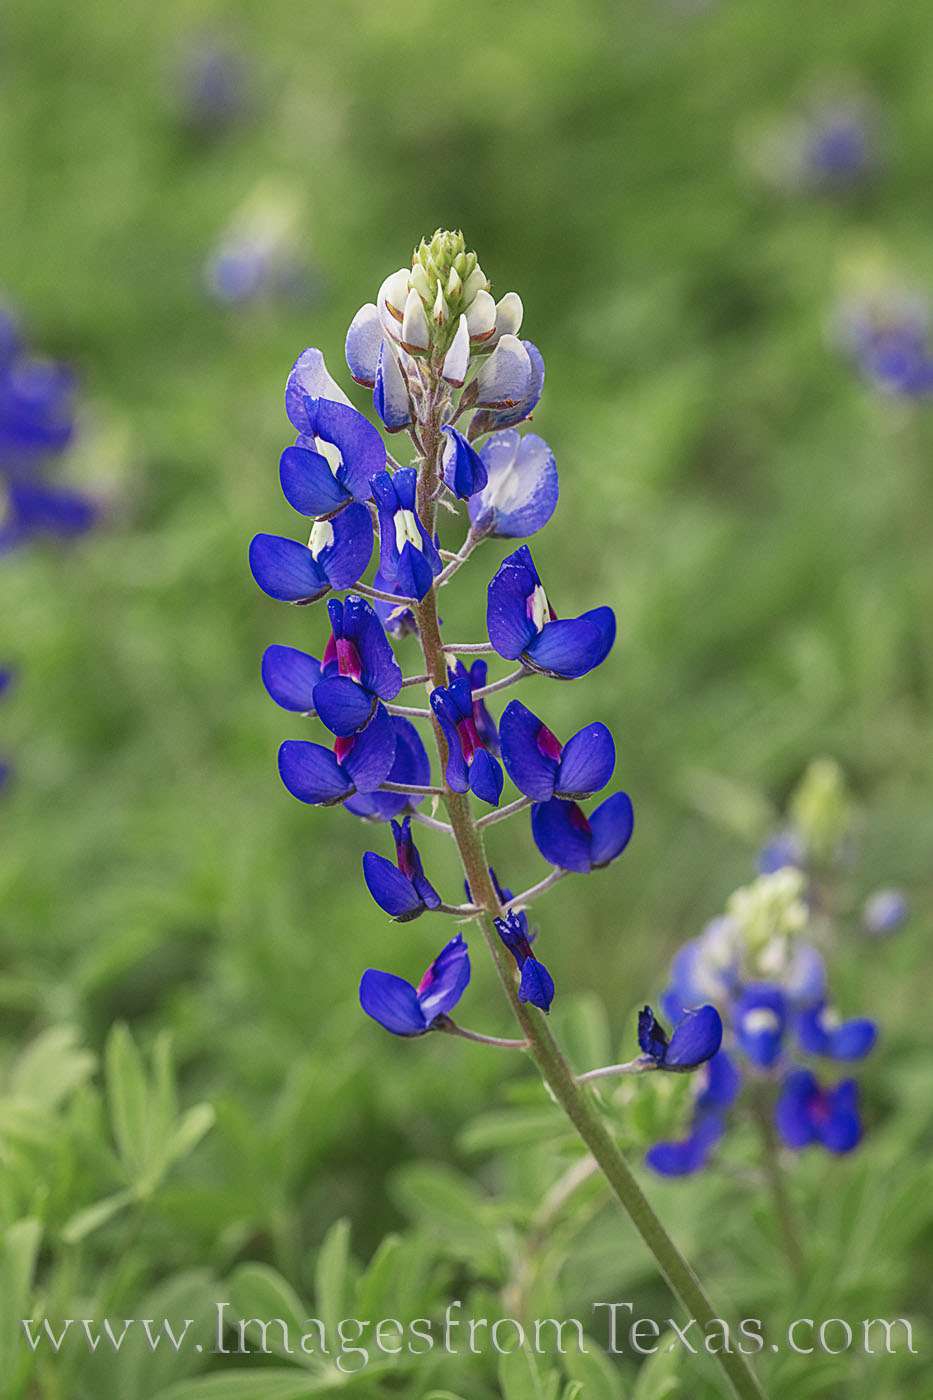 bluebonnets, portrait, wildflowers, hill country, wildflowers, Lupinus texensis